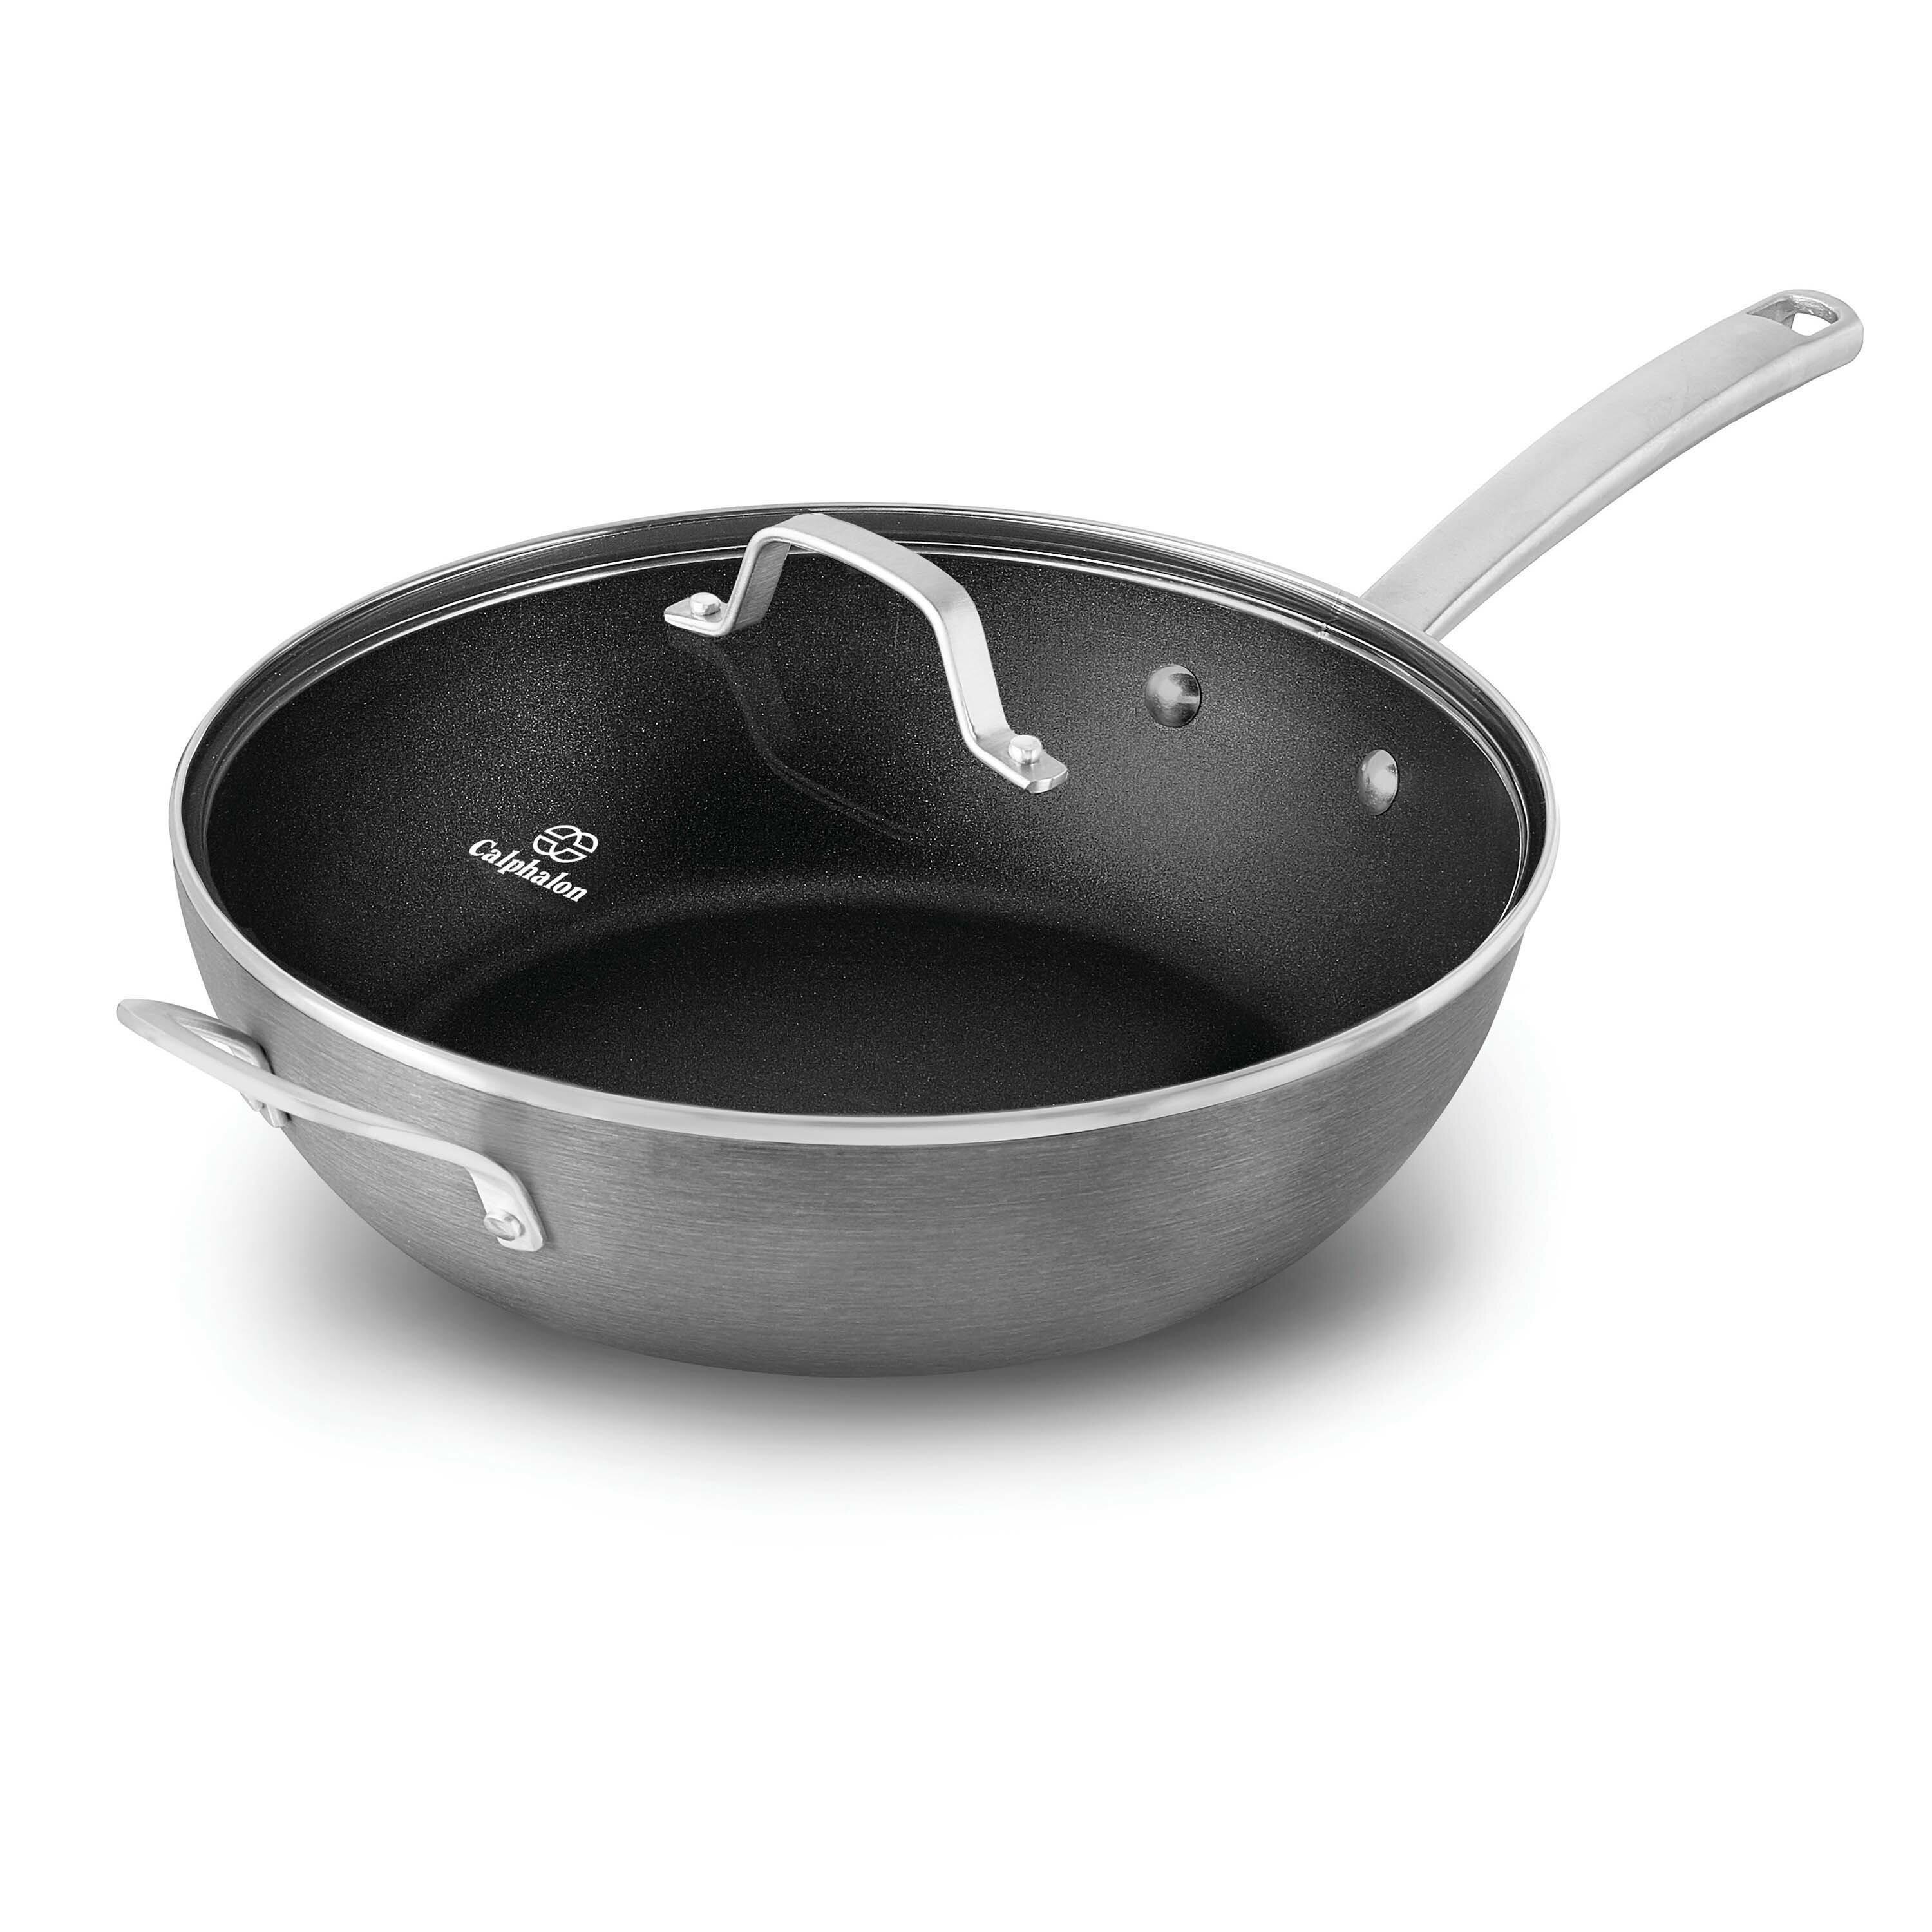 12 inch frying pan with lid